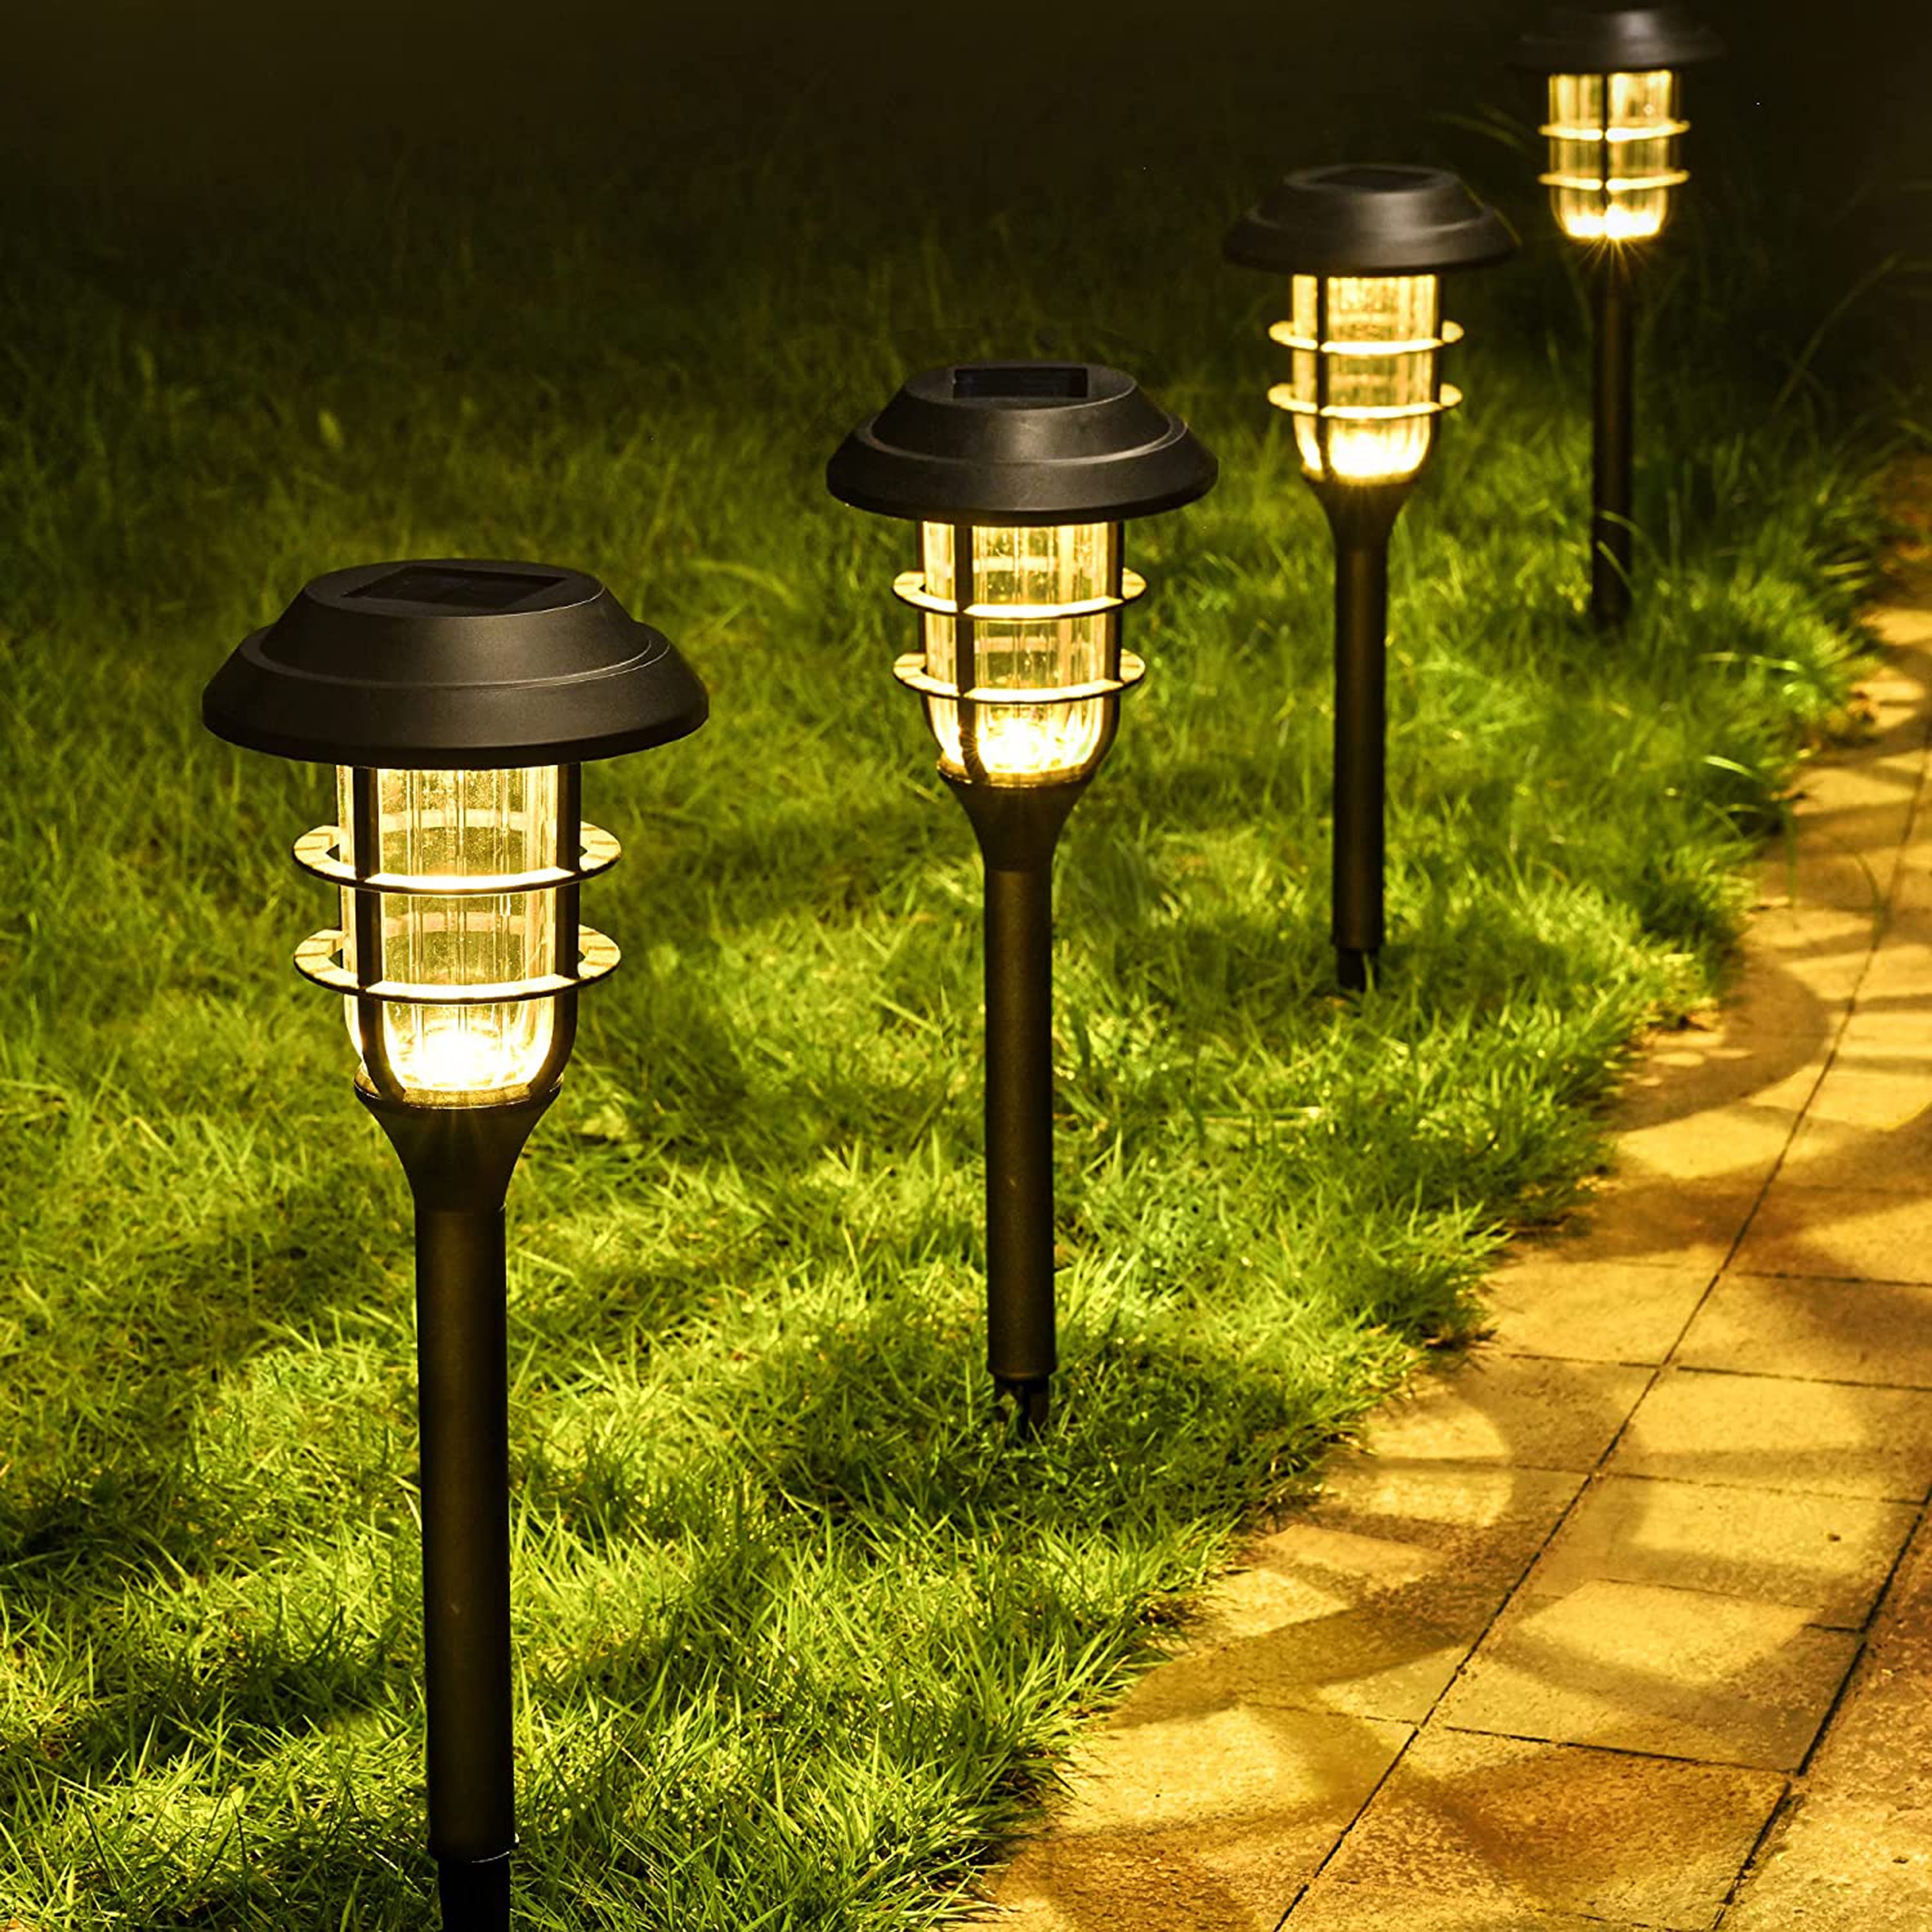 LED Solar Mosquito Killer Lamp Outdoor Torch Light Landscape Pathway Wall Lamp 